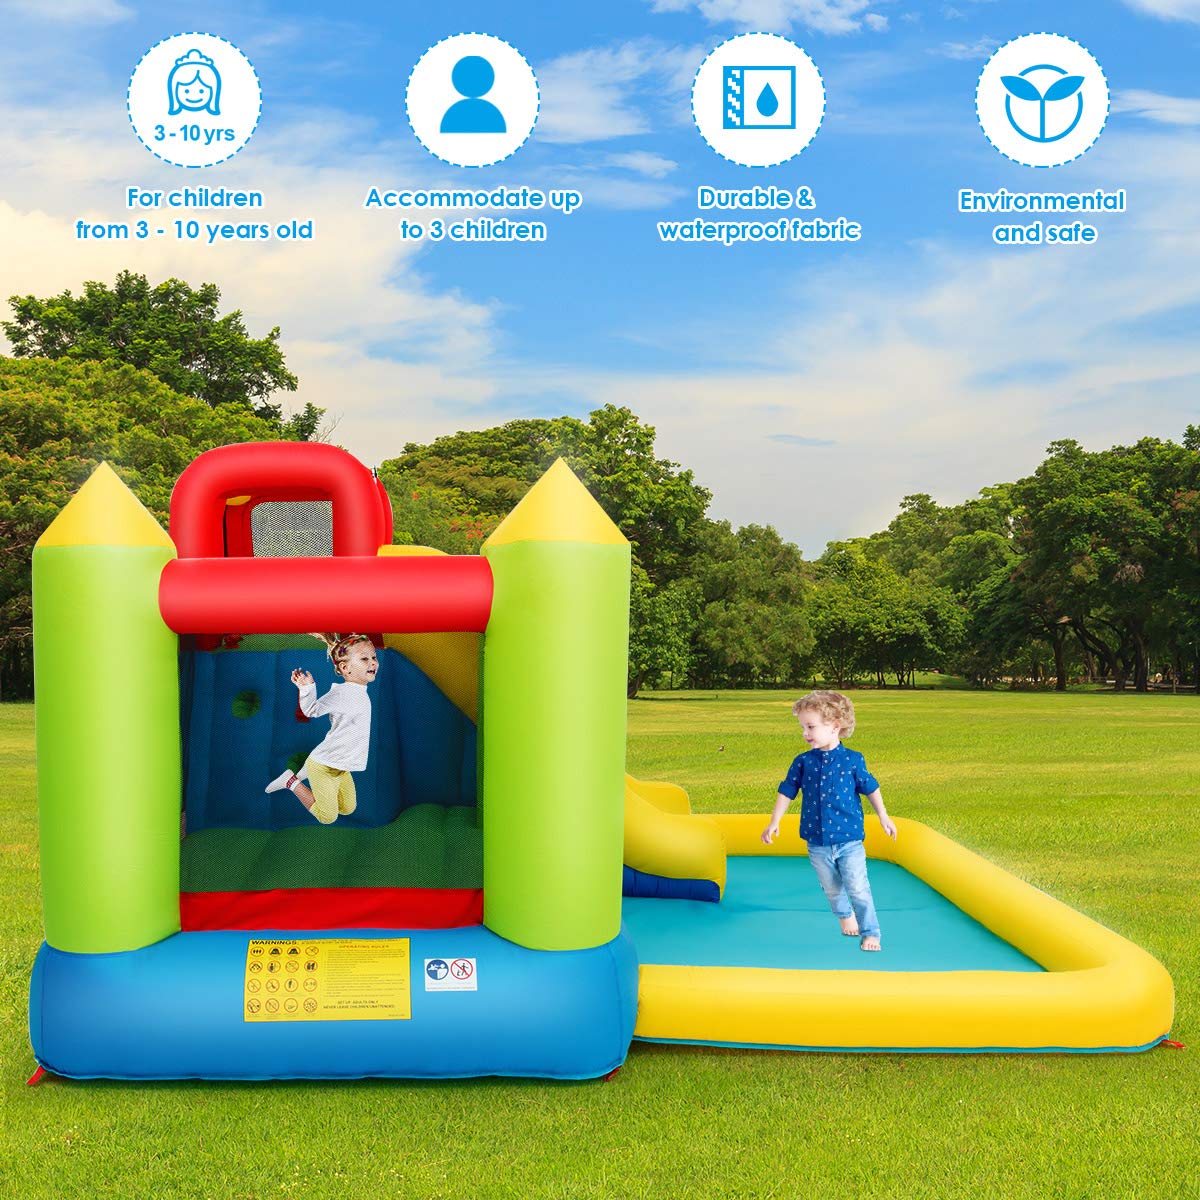 Costzon Inflatable Water Slide, Water Bounce House Combo for Kids Outdoor Fun with Large Jumping Area, Climbing Wall, Splash Pool, Blow up Waterslides Park Inflatable for Kids Backyard Party Gifts without blower